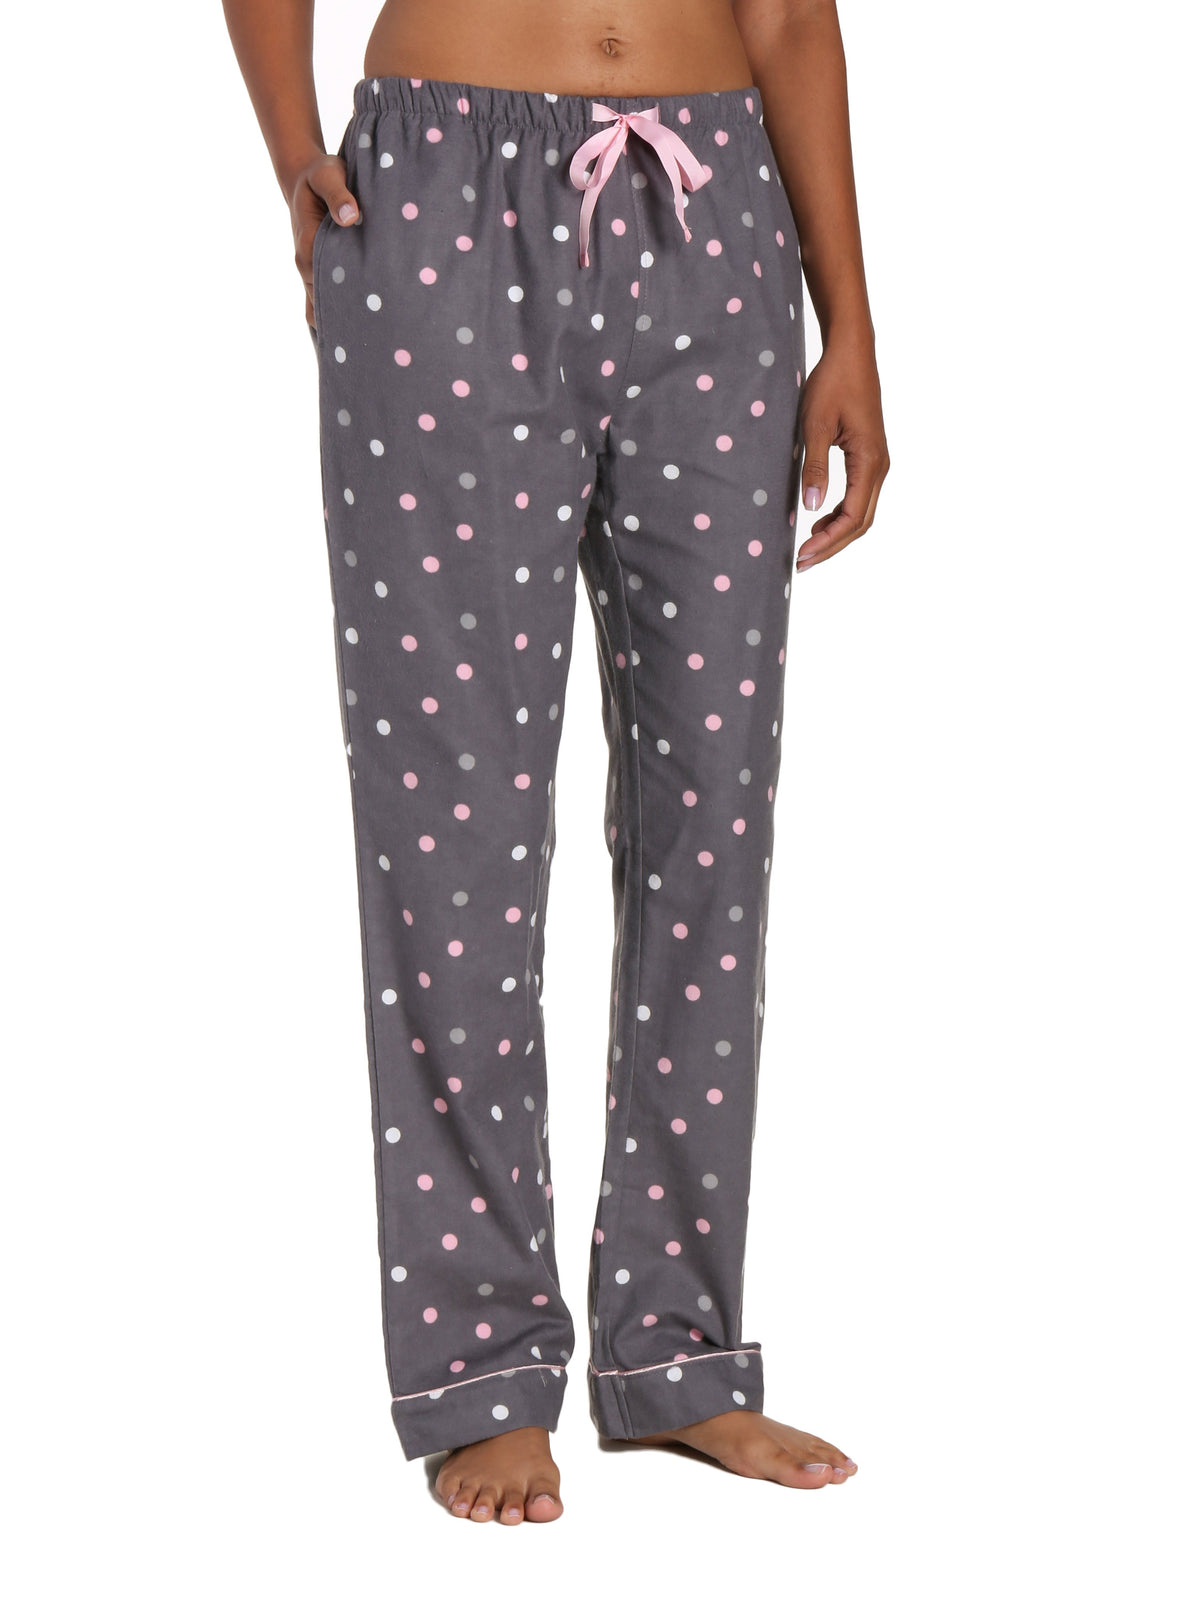 Womens 100% Cotton Flannel Lounge Pants - Polka Medley Gray-Pink